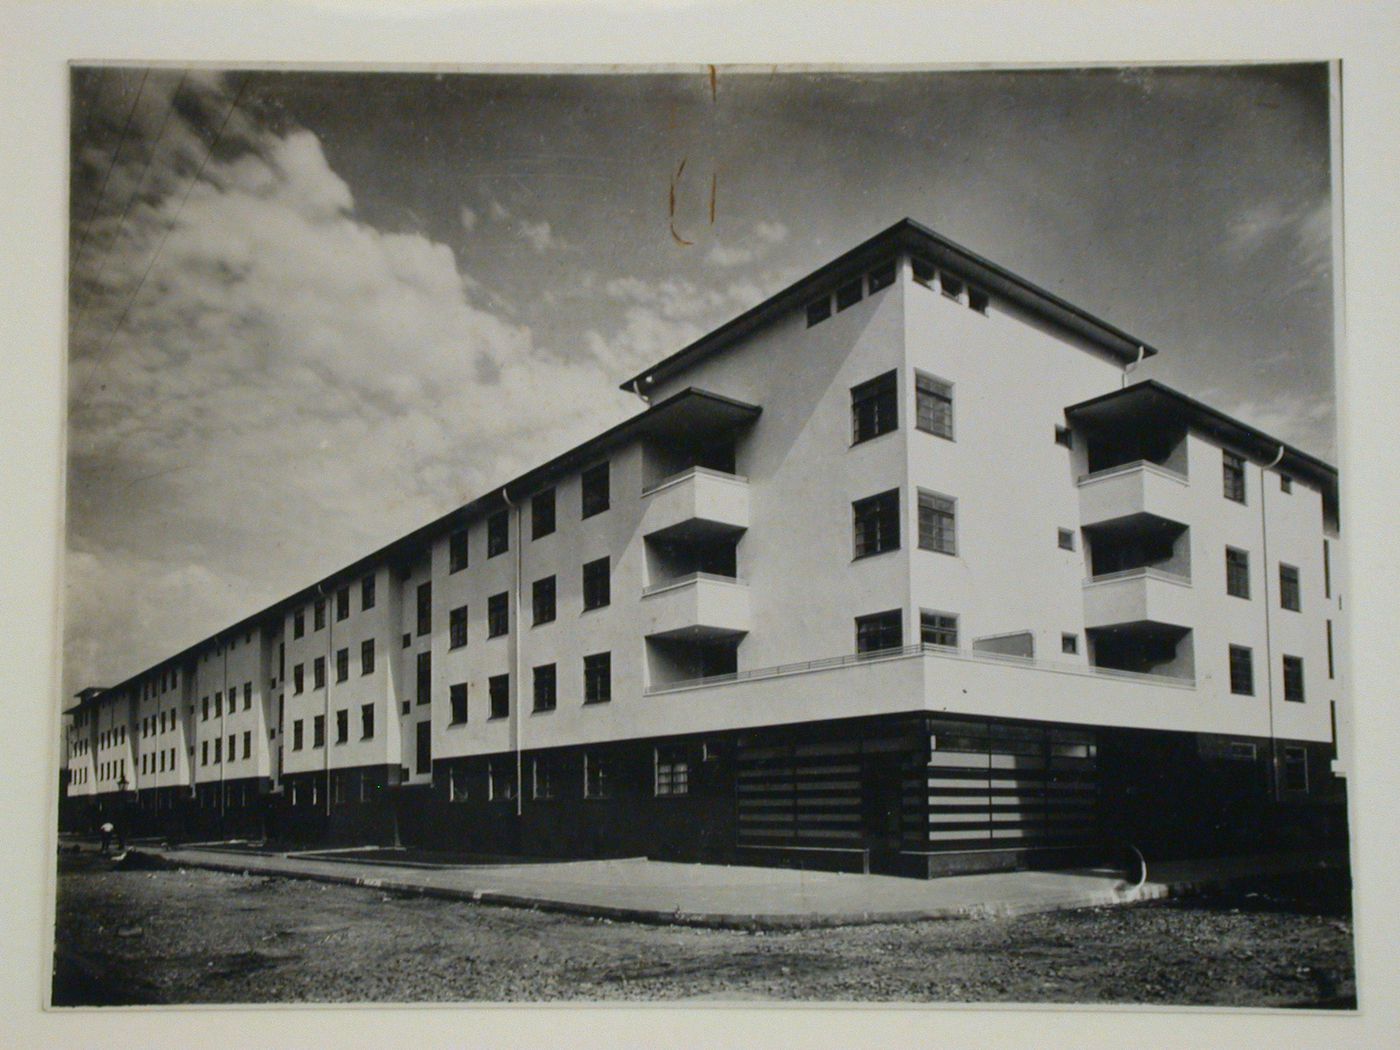 View of a housing block, Cologne, Germany